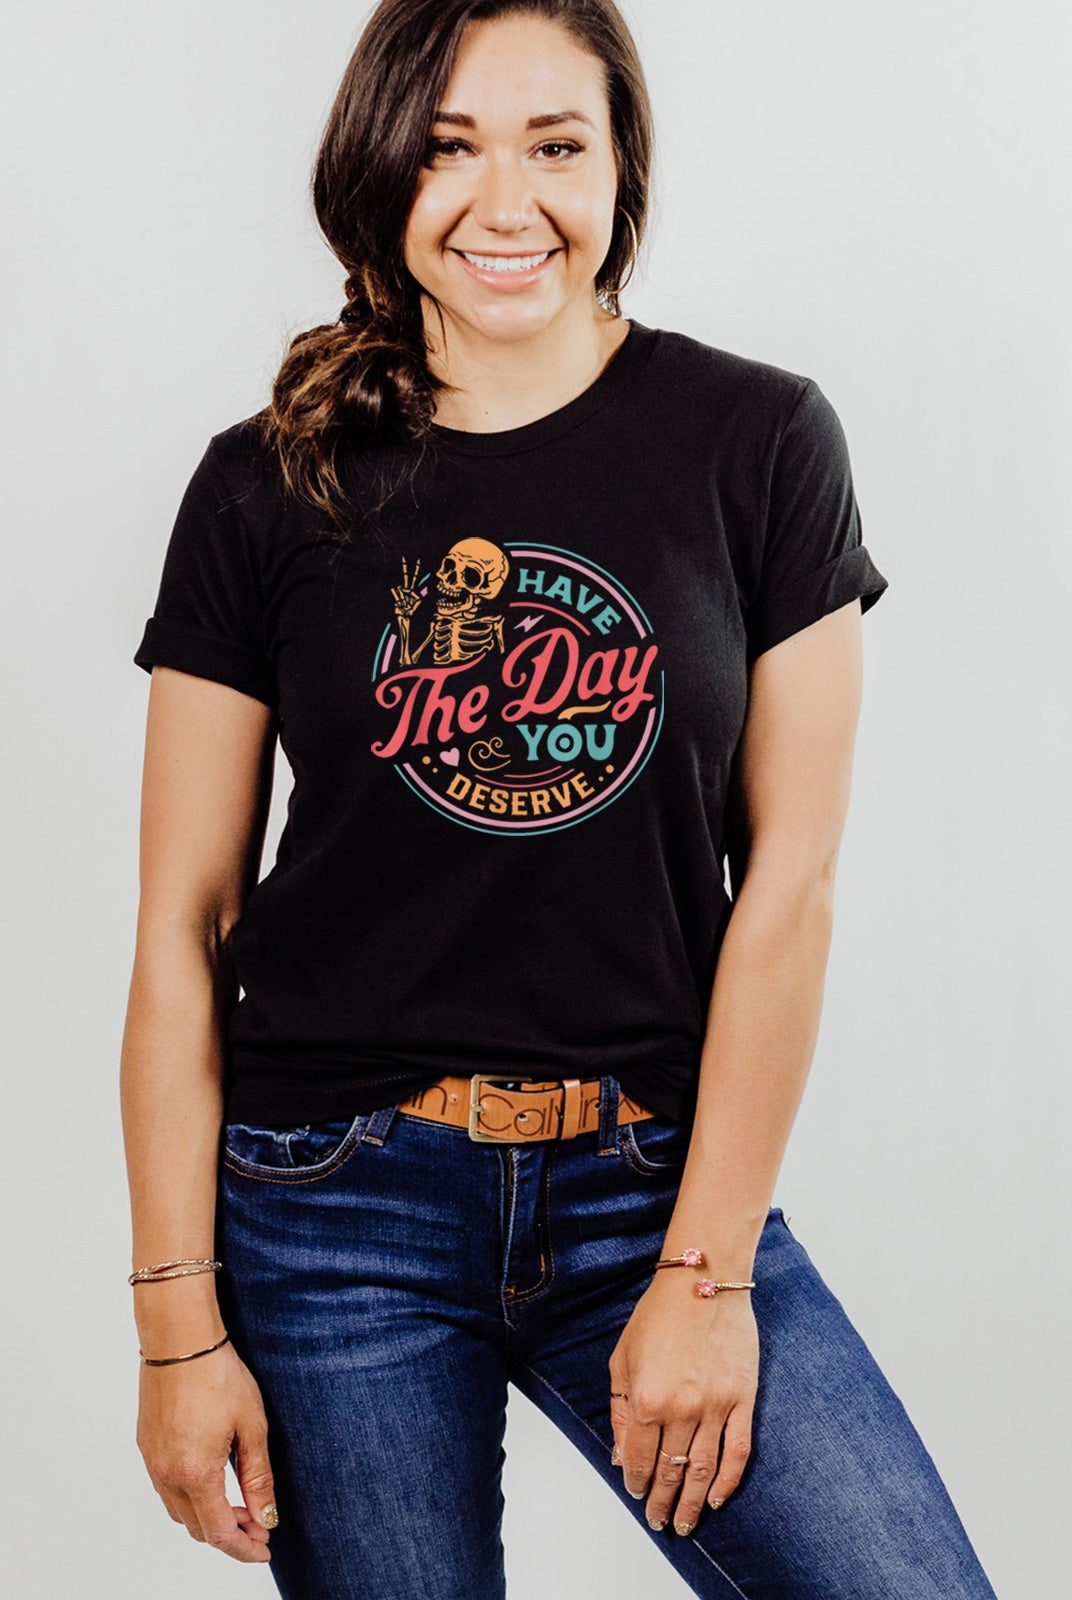 Day You Deserve shirt on black tee worn by female model